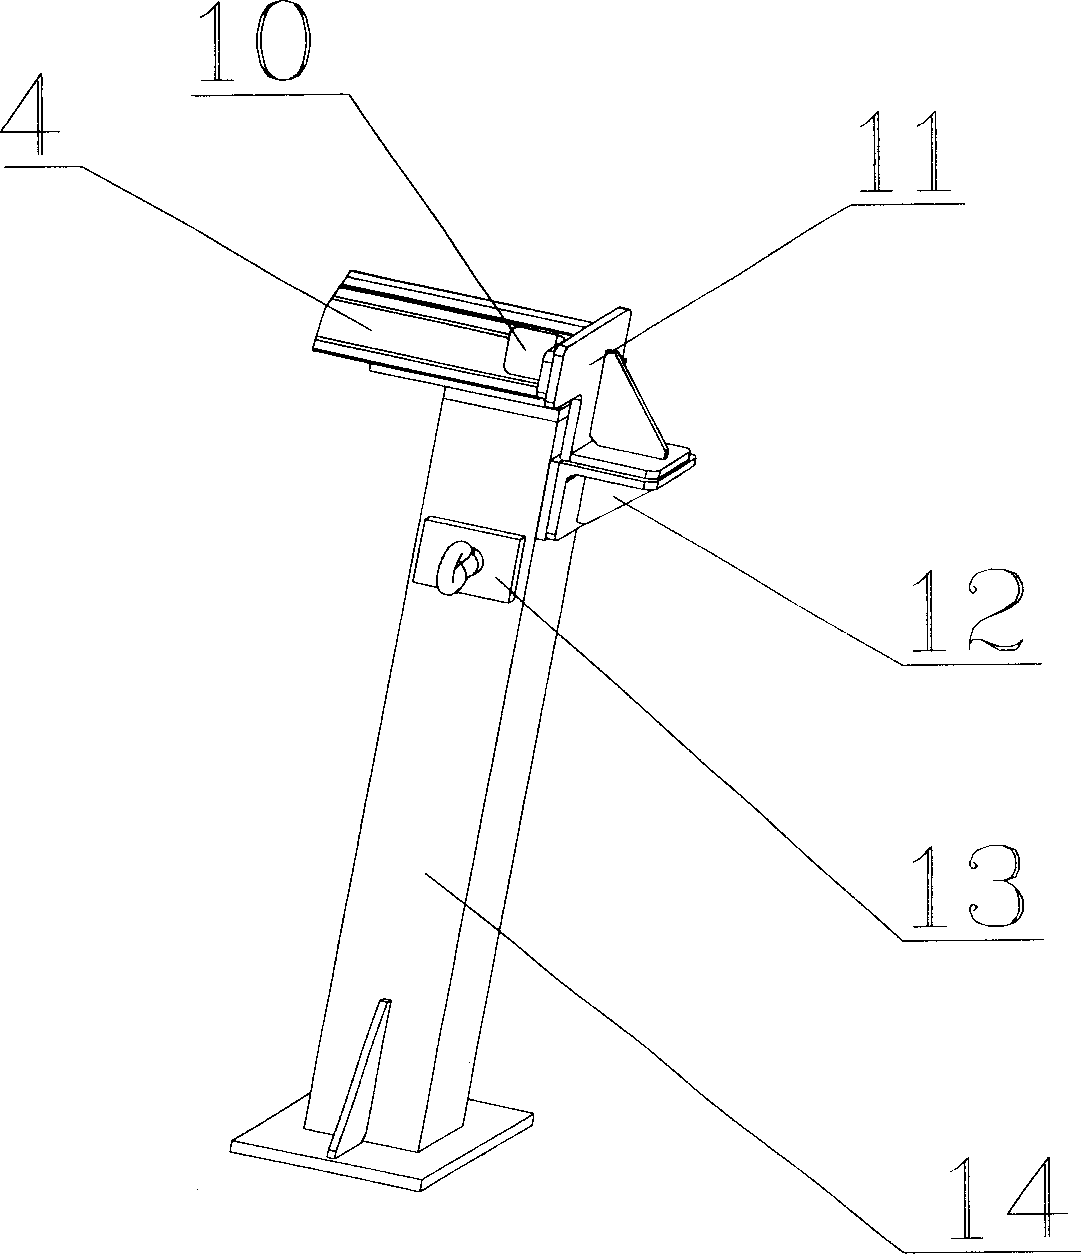 Multi-status combined frame for installing large-length vehicle container